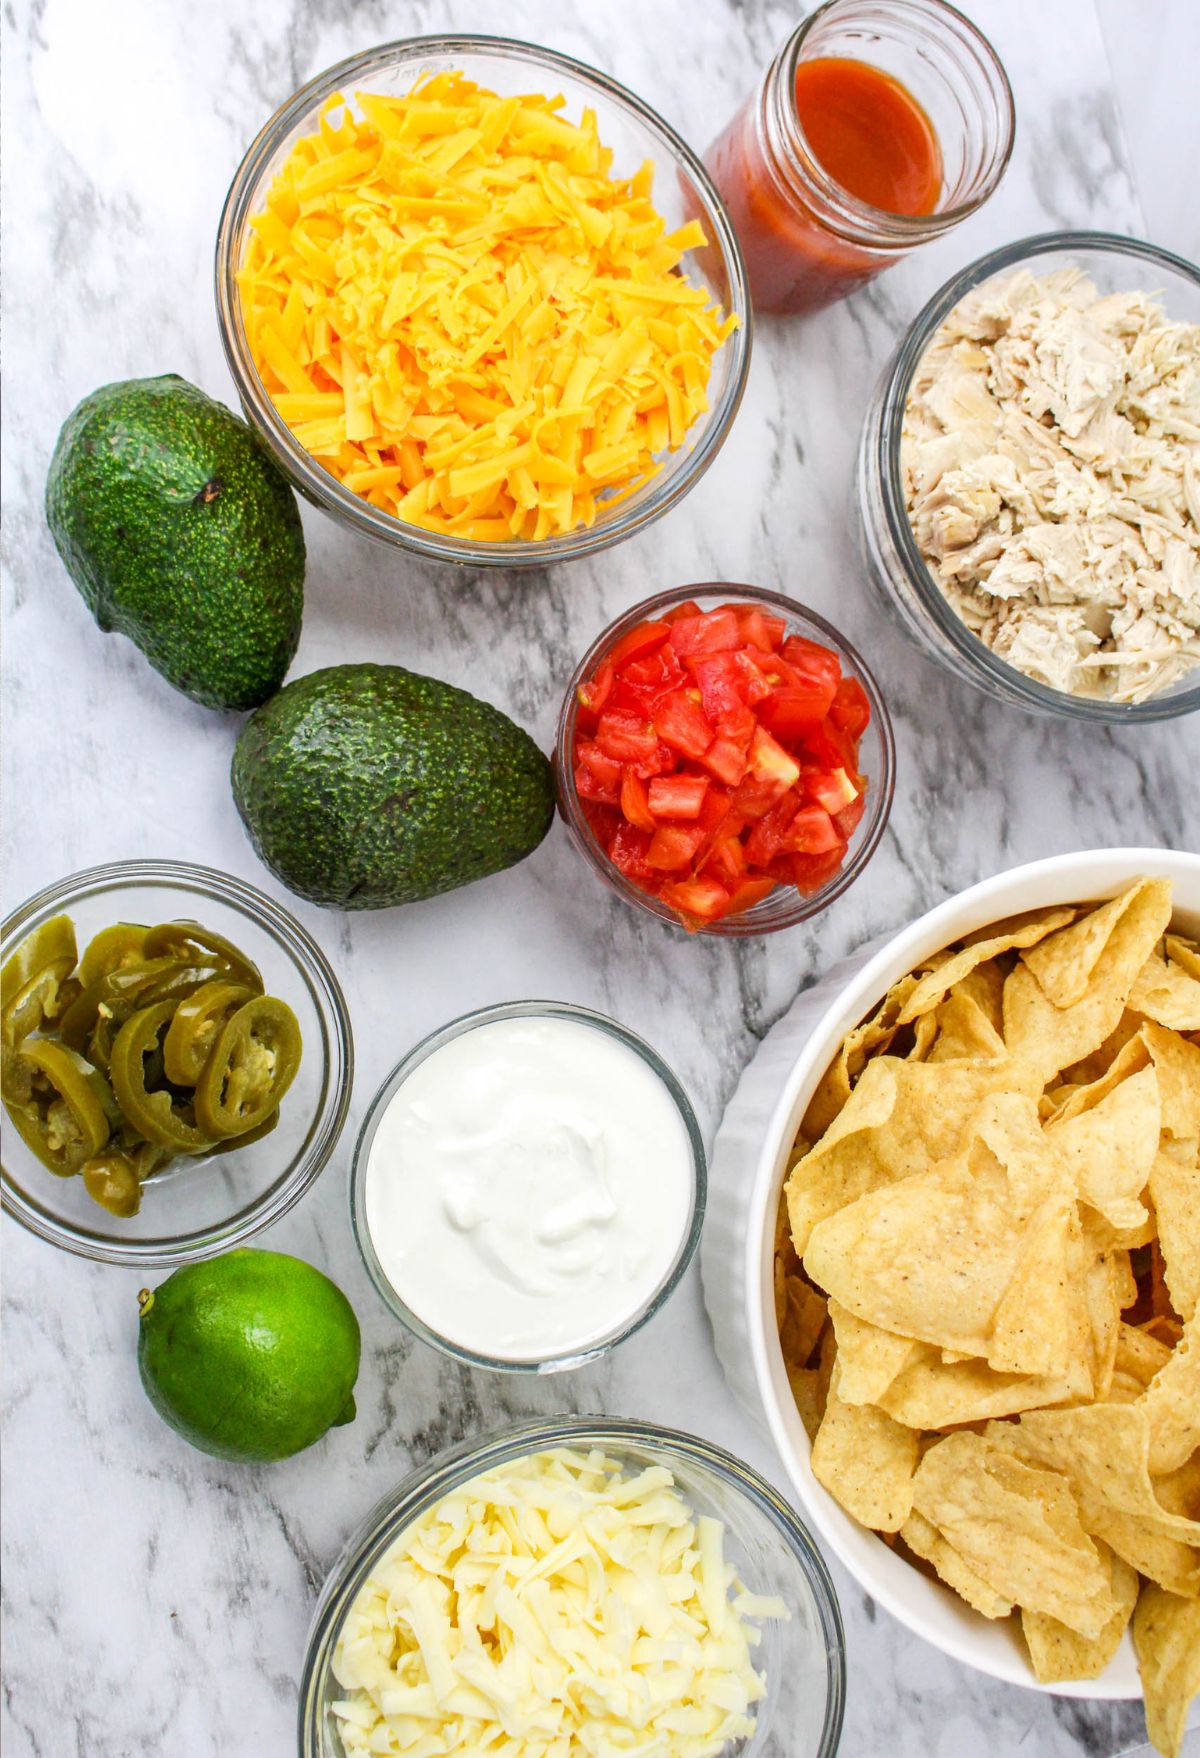 The ingredients for chicken nachos are laid out on a marble countertop.